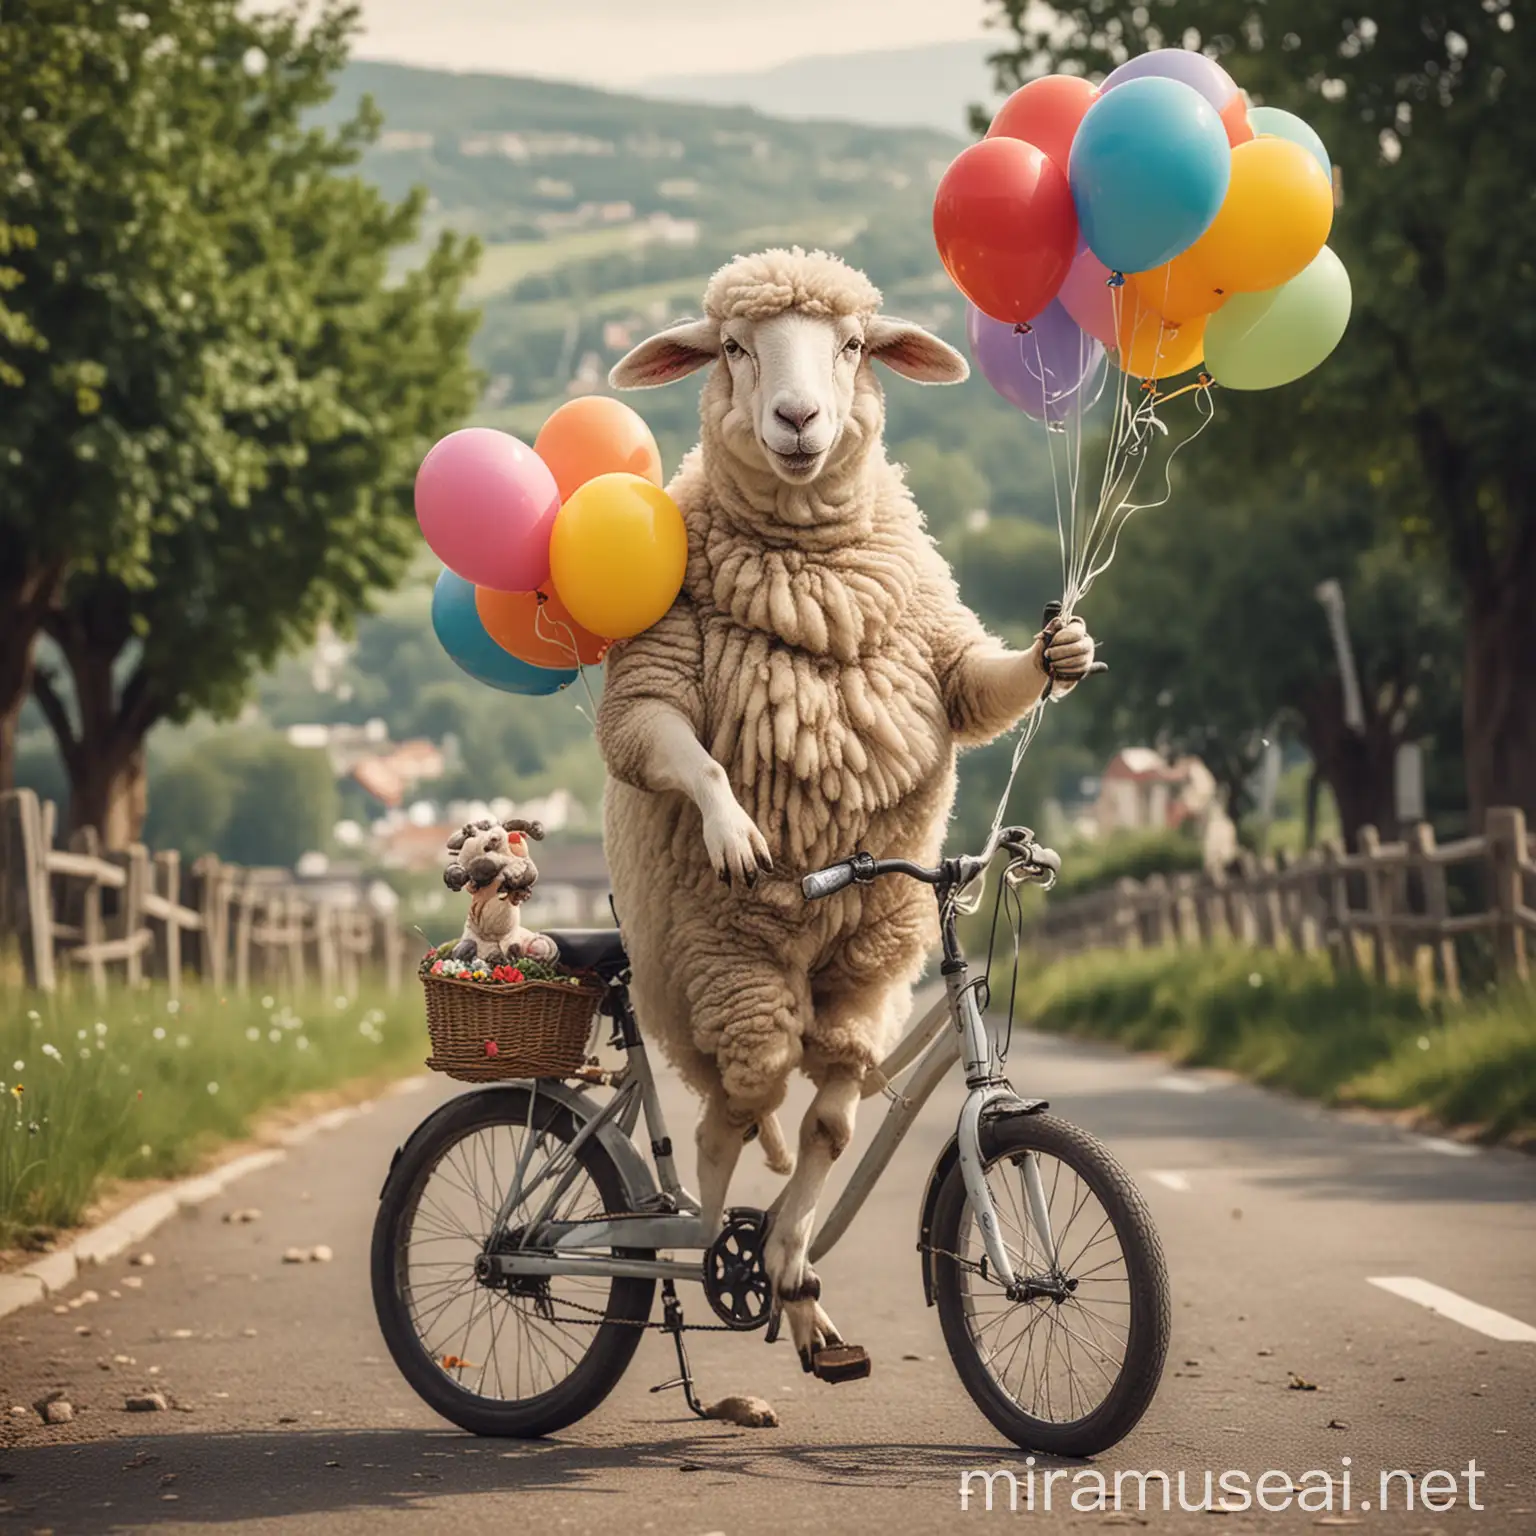 Cheerful Sheep Riding Bike with Colorful Balloons